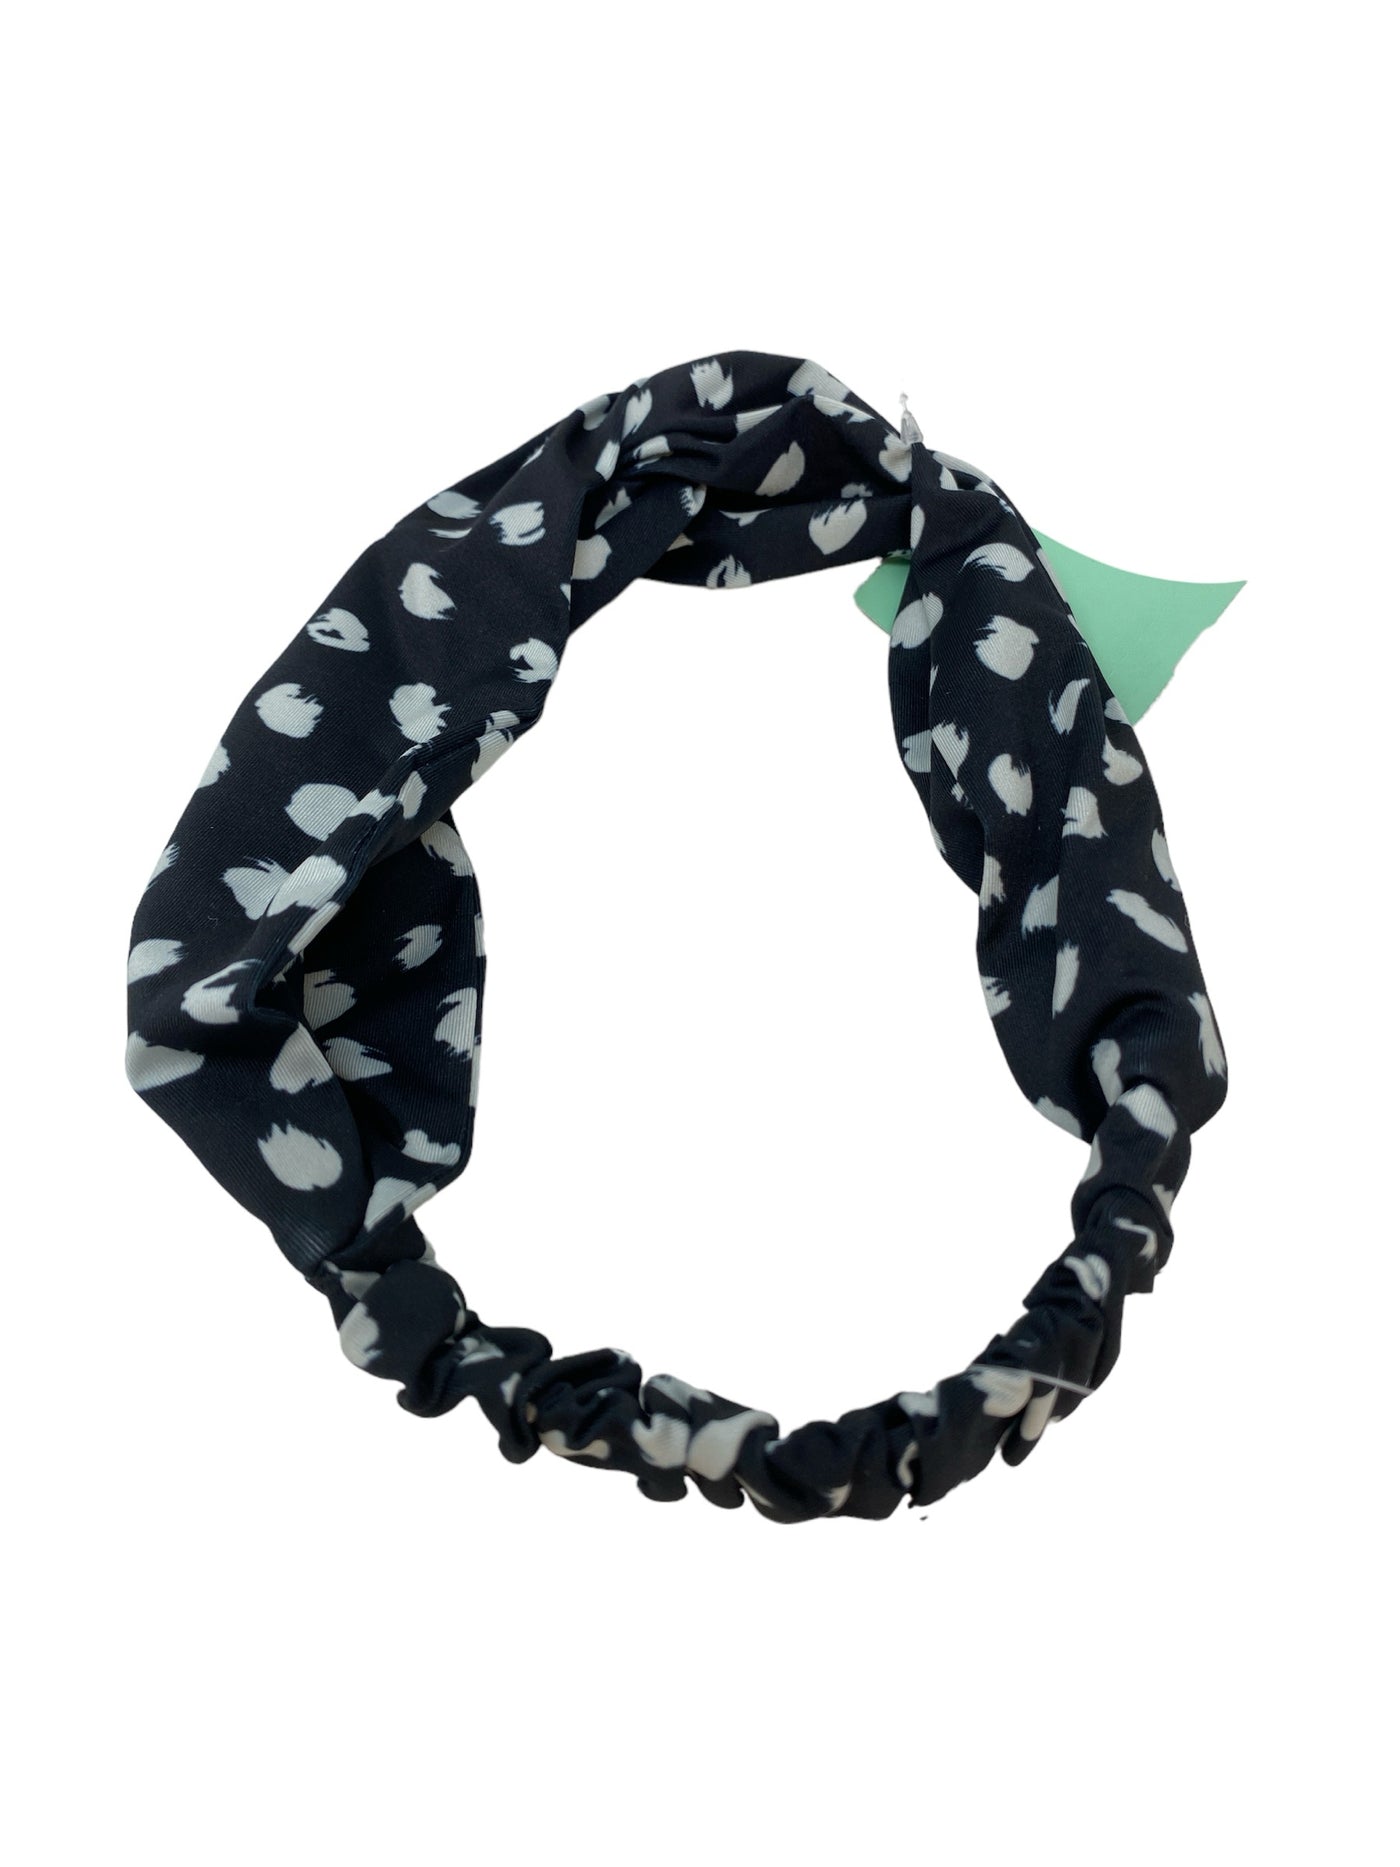 J Crew Black Print New With Tags Hair Accessories